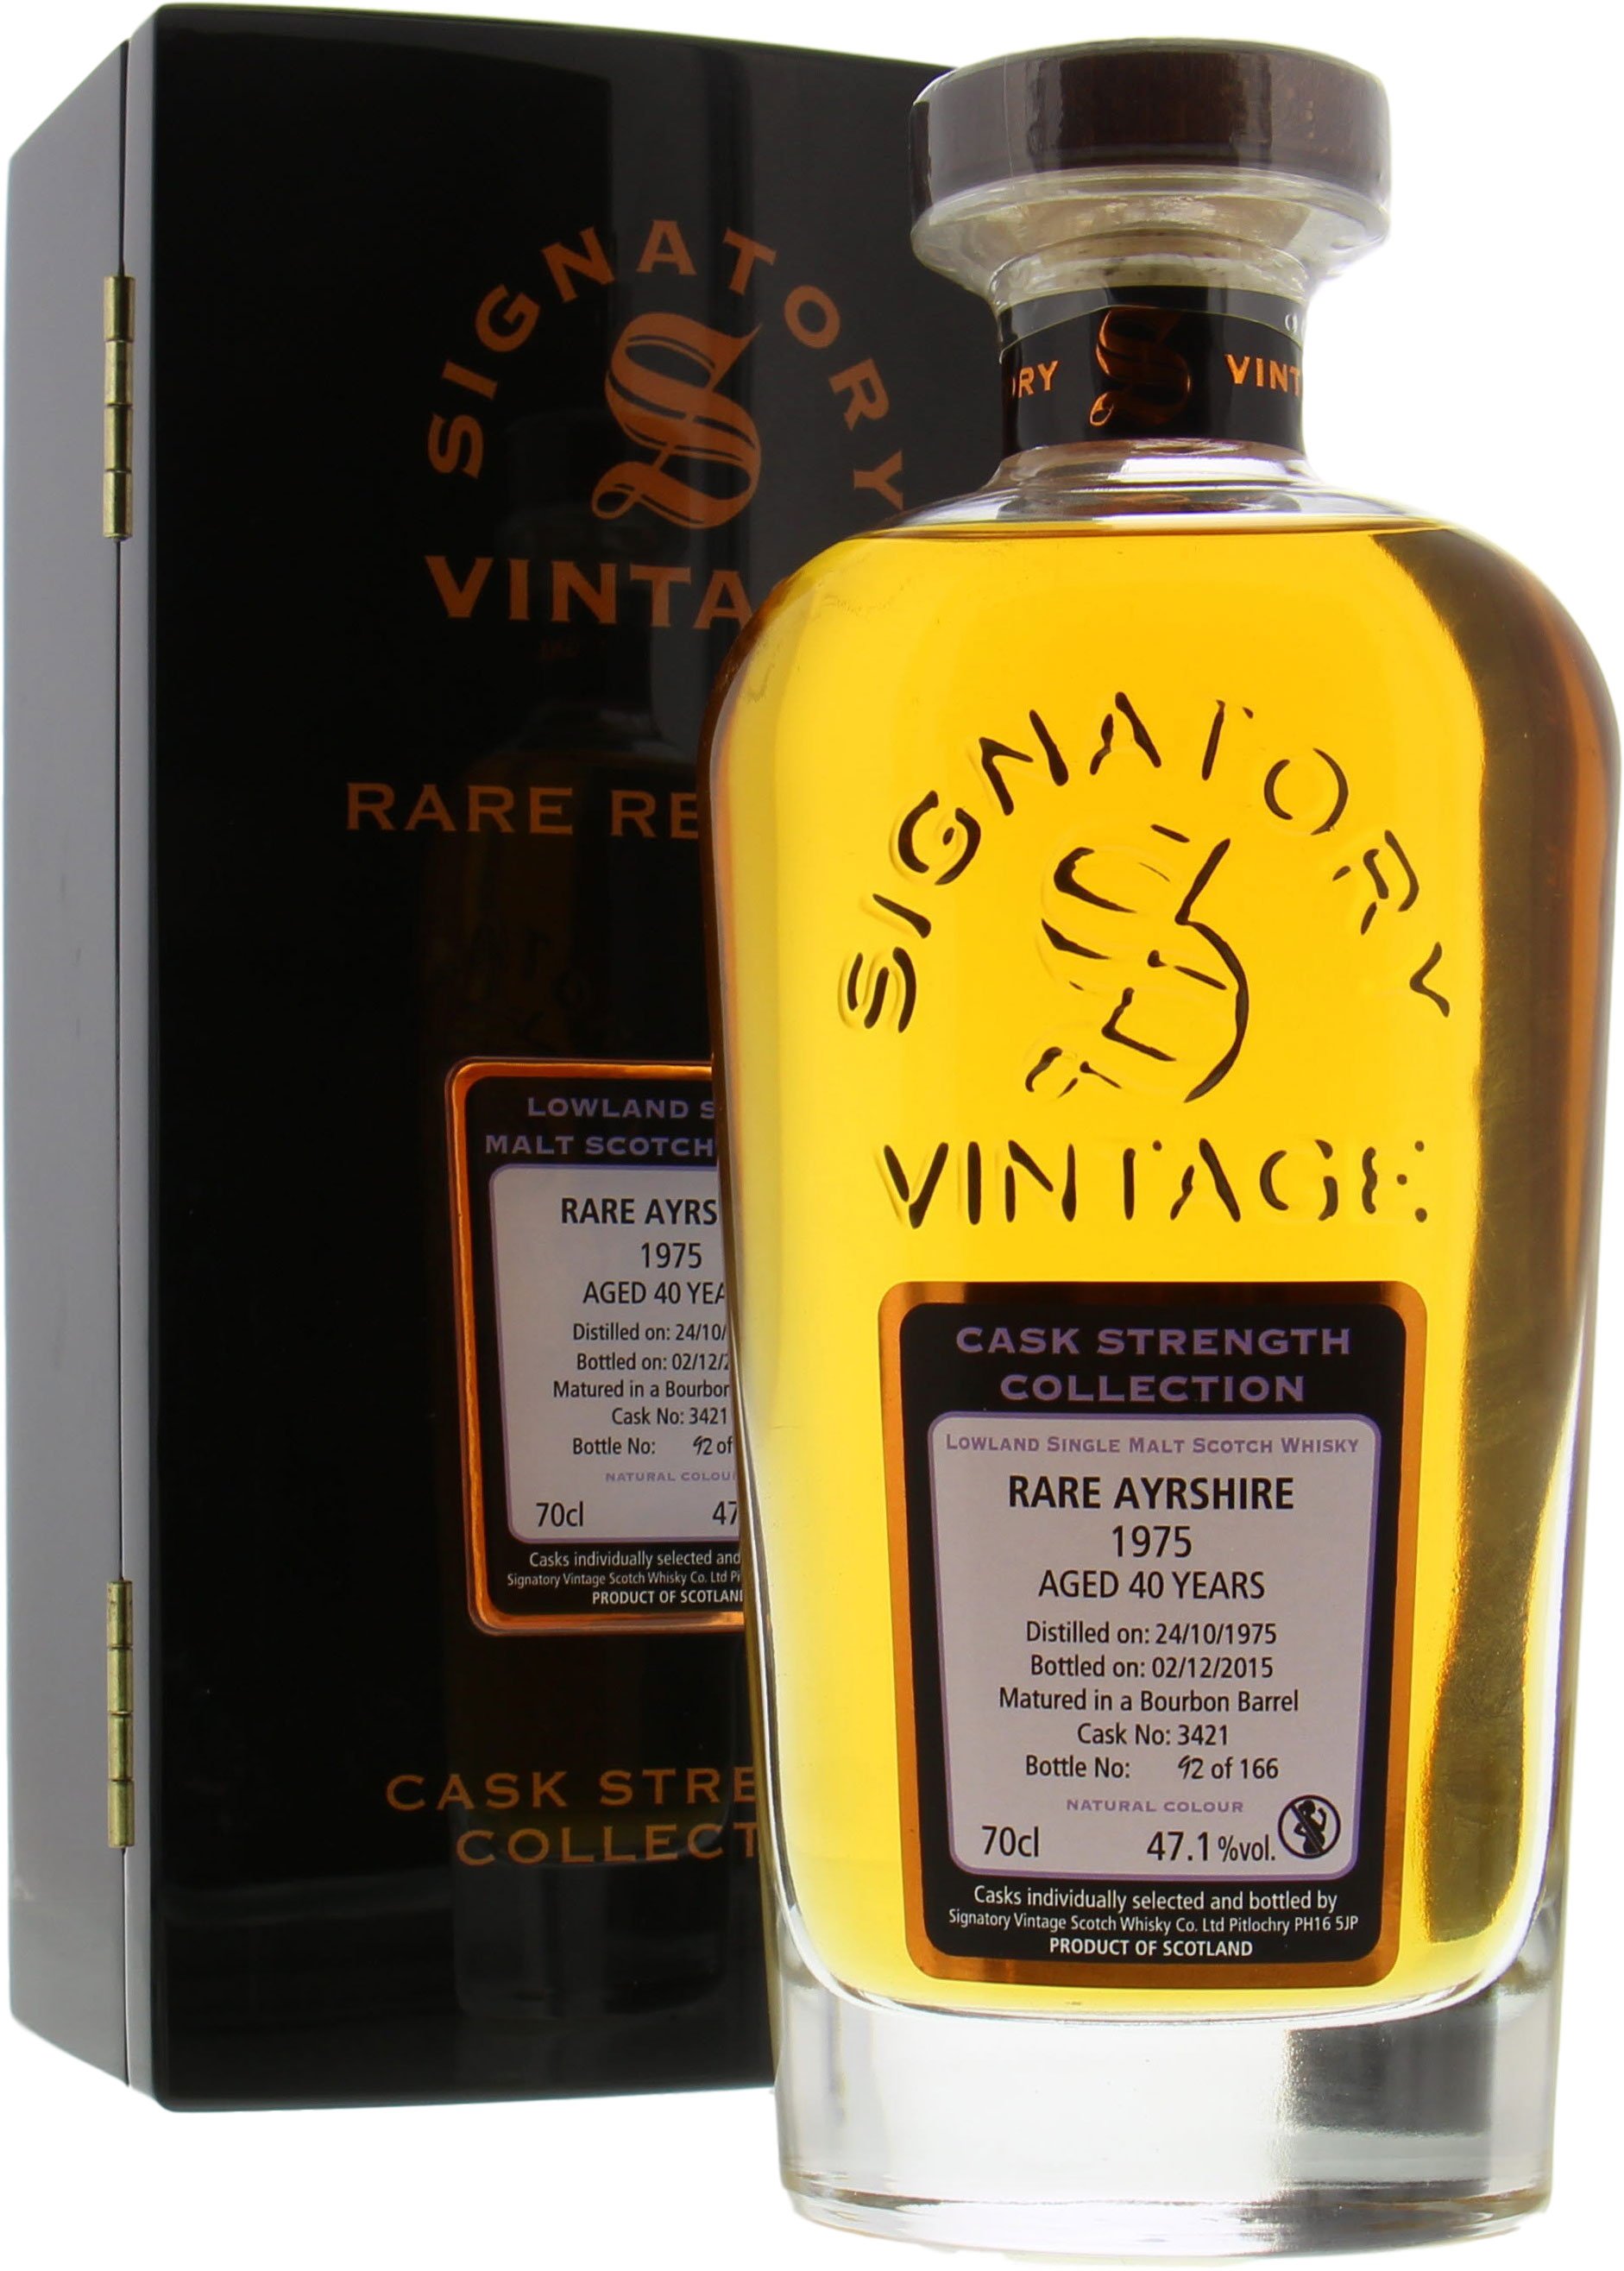 Ladyburn - 40 Years Old Rare Ayrshire Signatory Vintage Cask 3421 57.1% 1975 In Original Wooden Container